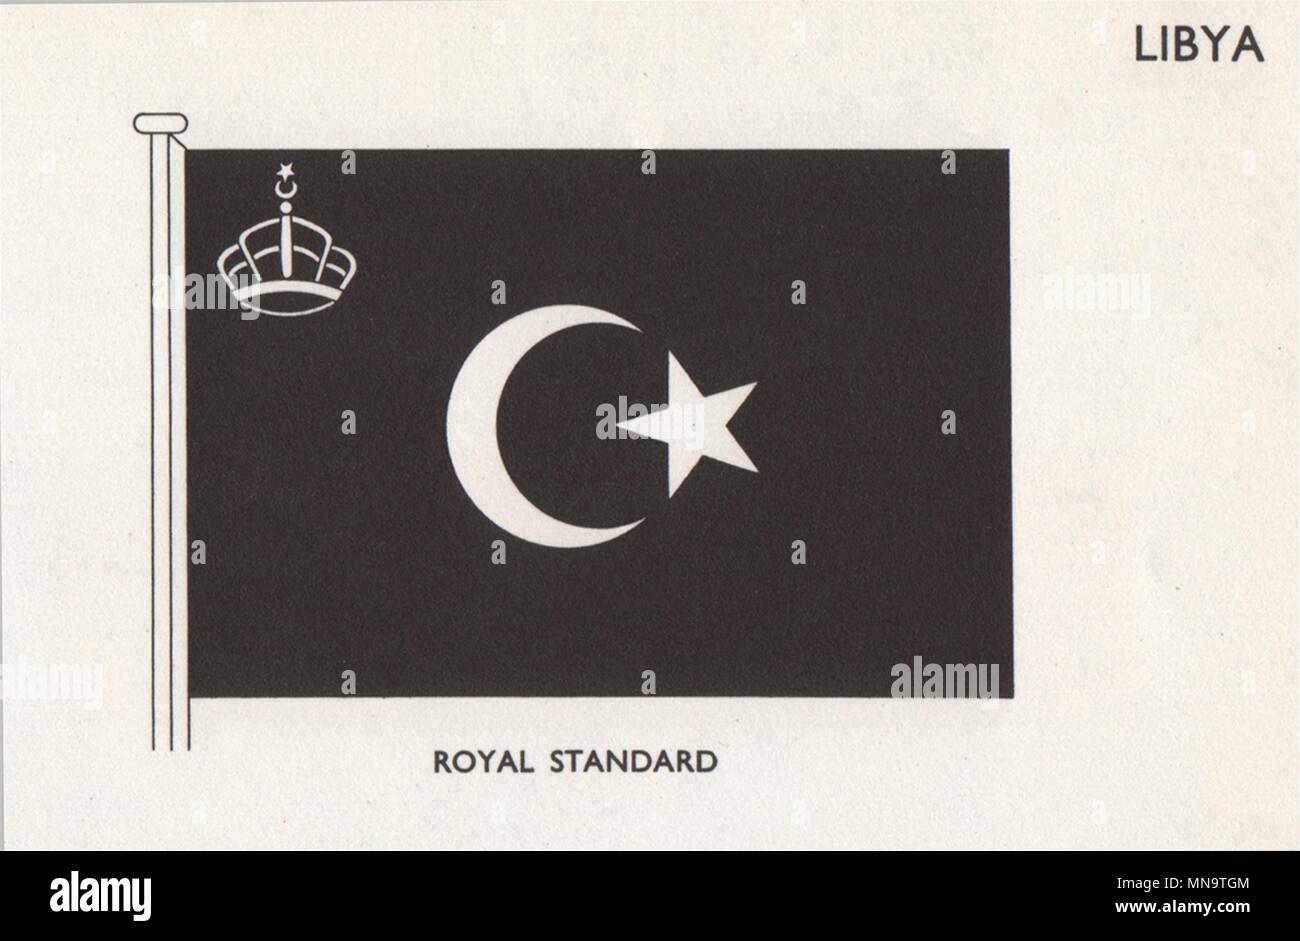 LIBYA FLAGS. Royal Standard 1958 old vintage print picture Stock Photo